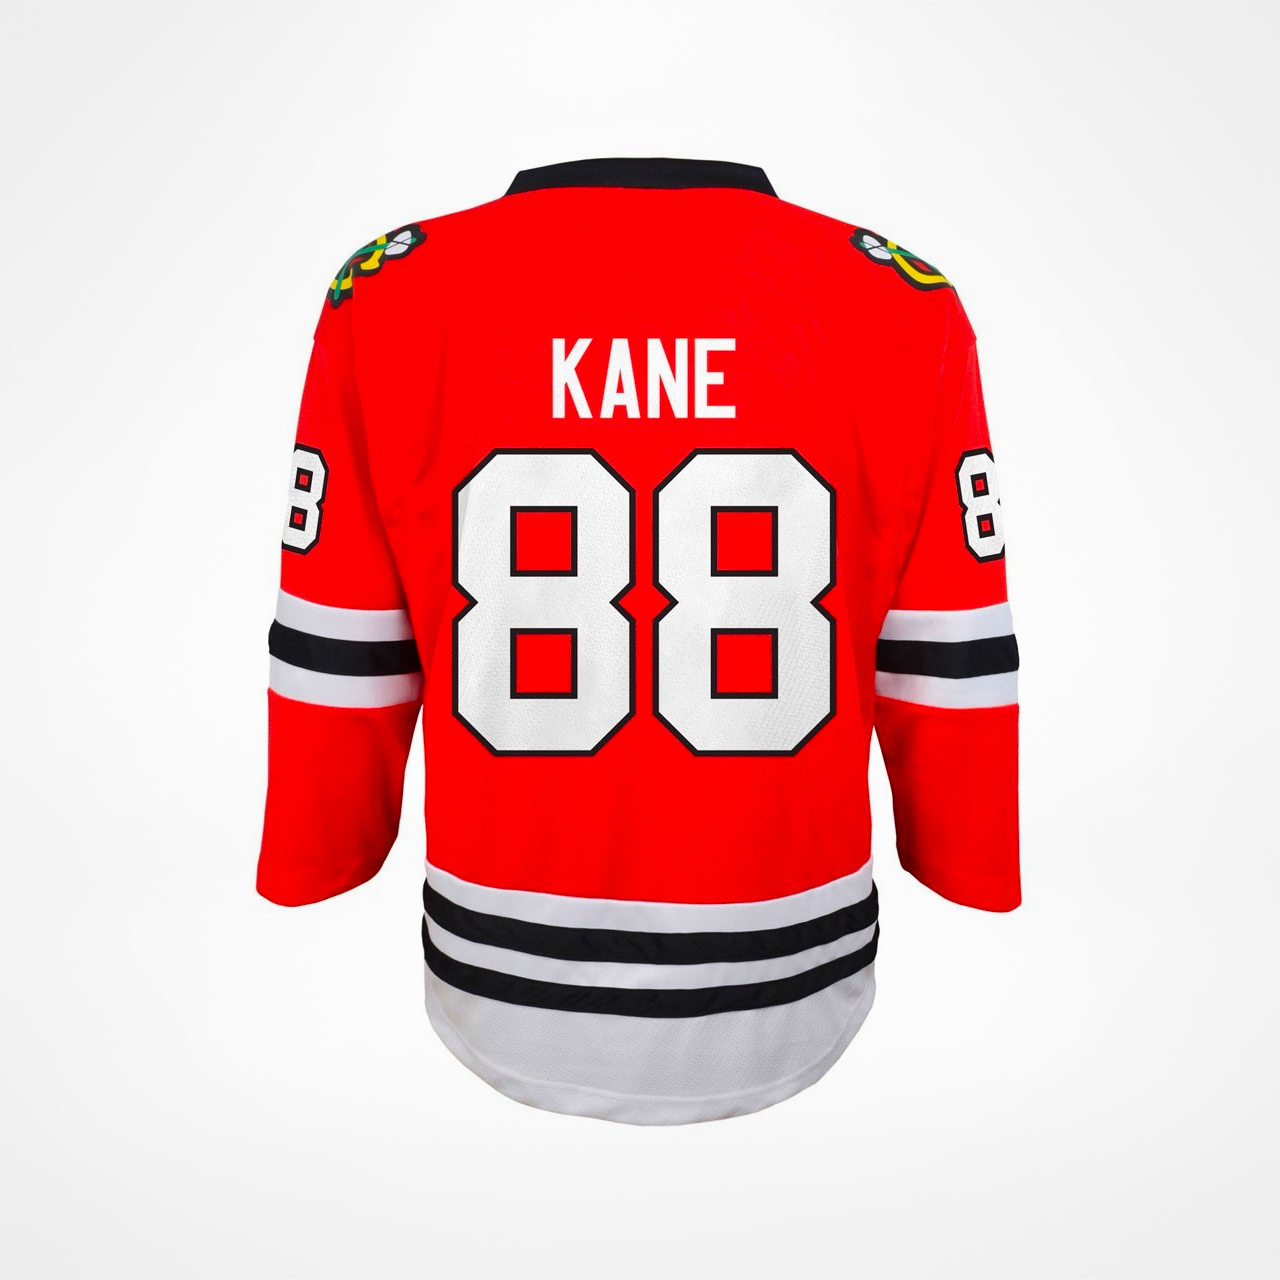 where can i buy a blackhawks jersey